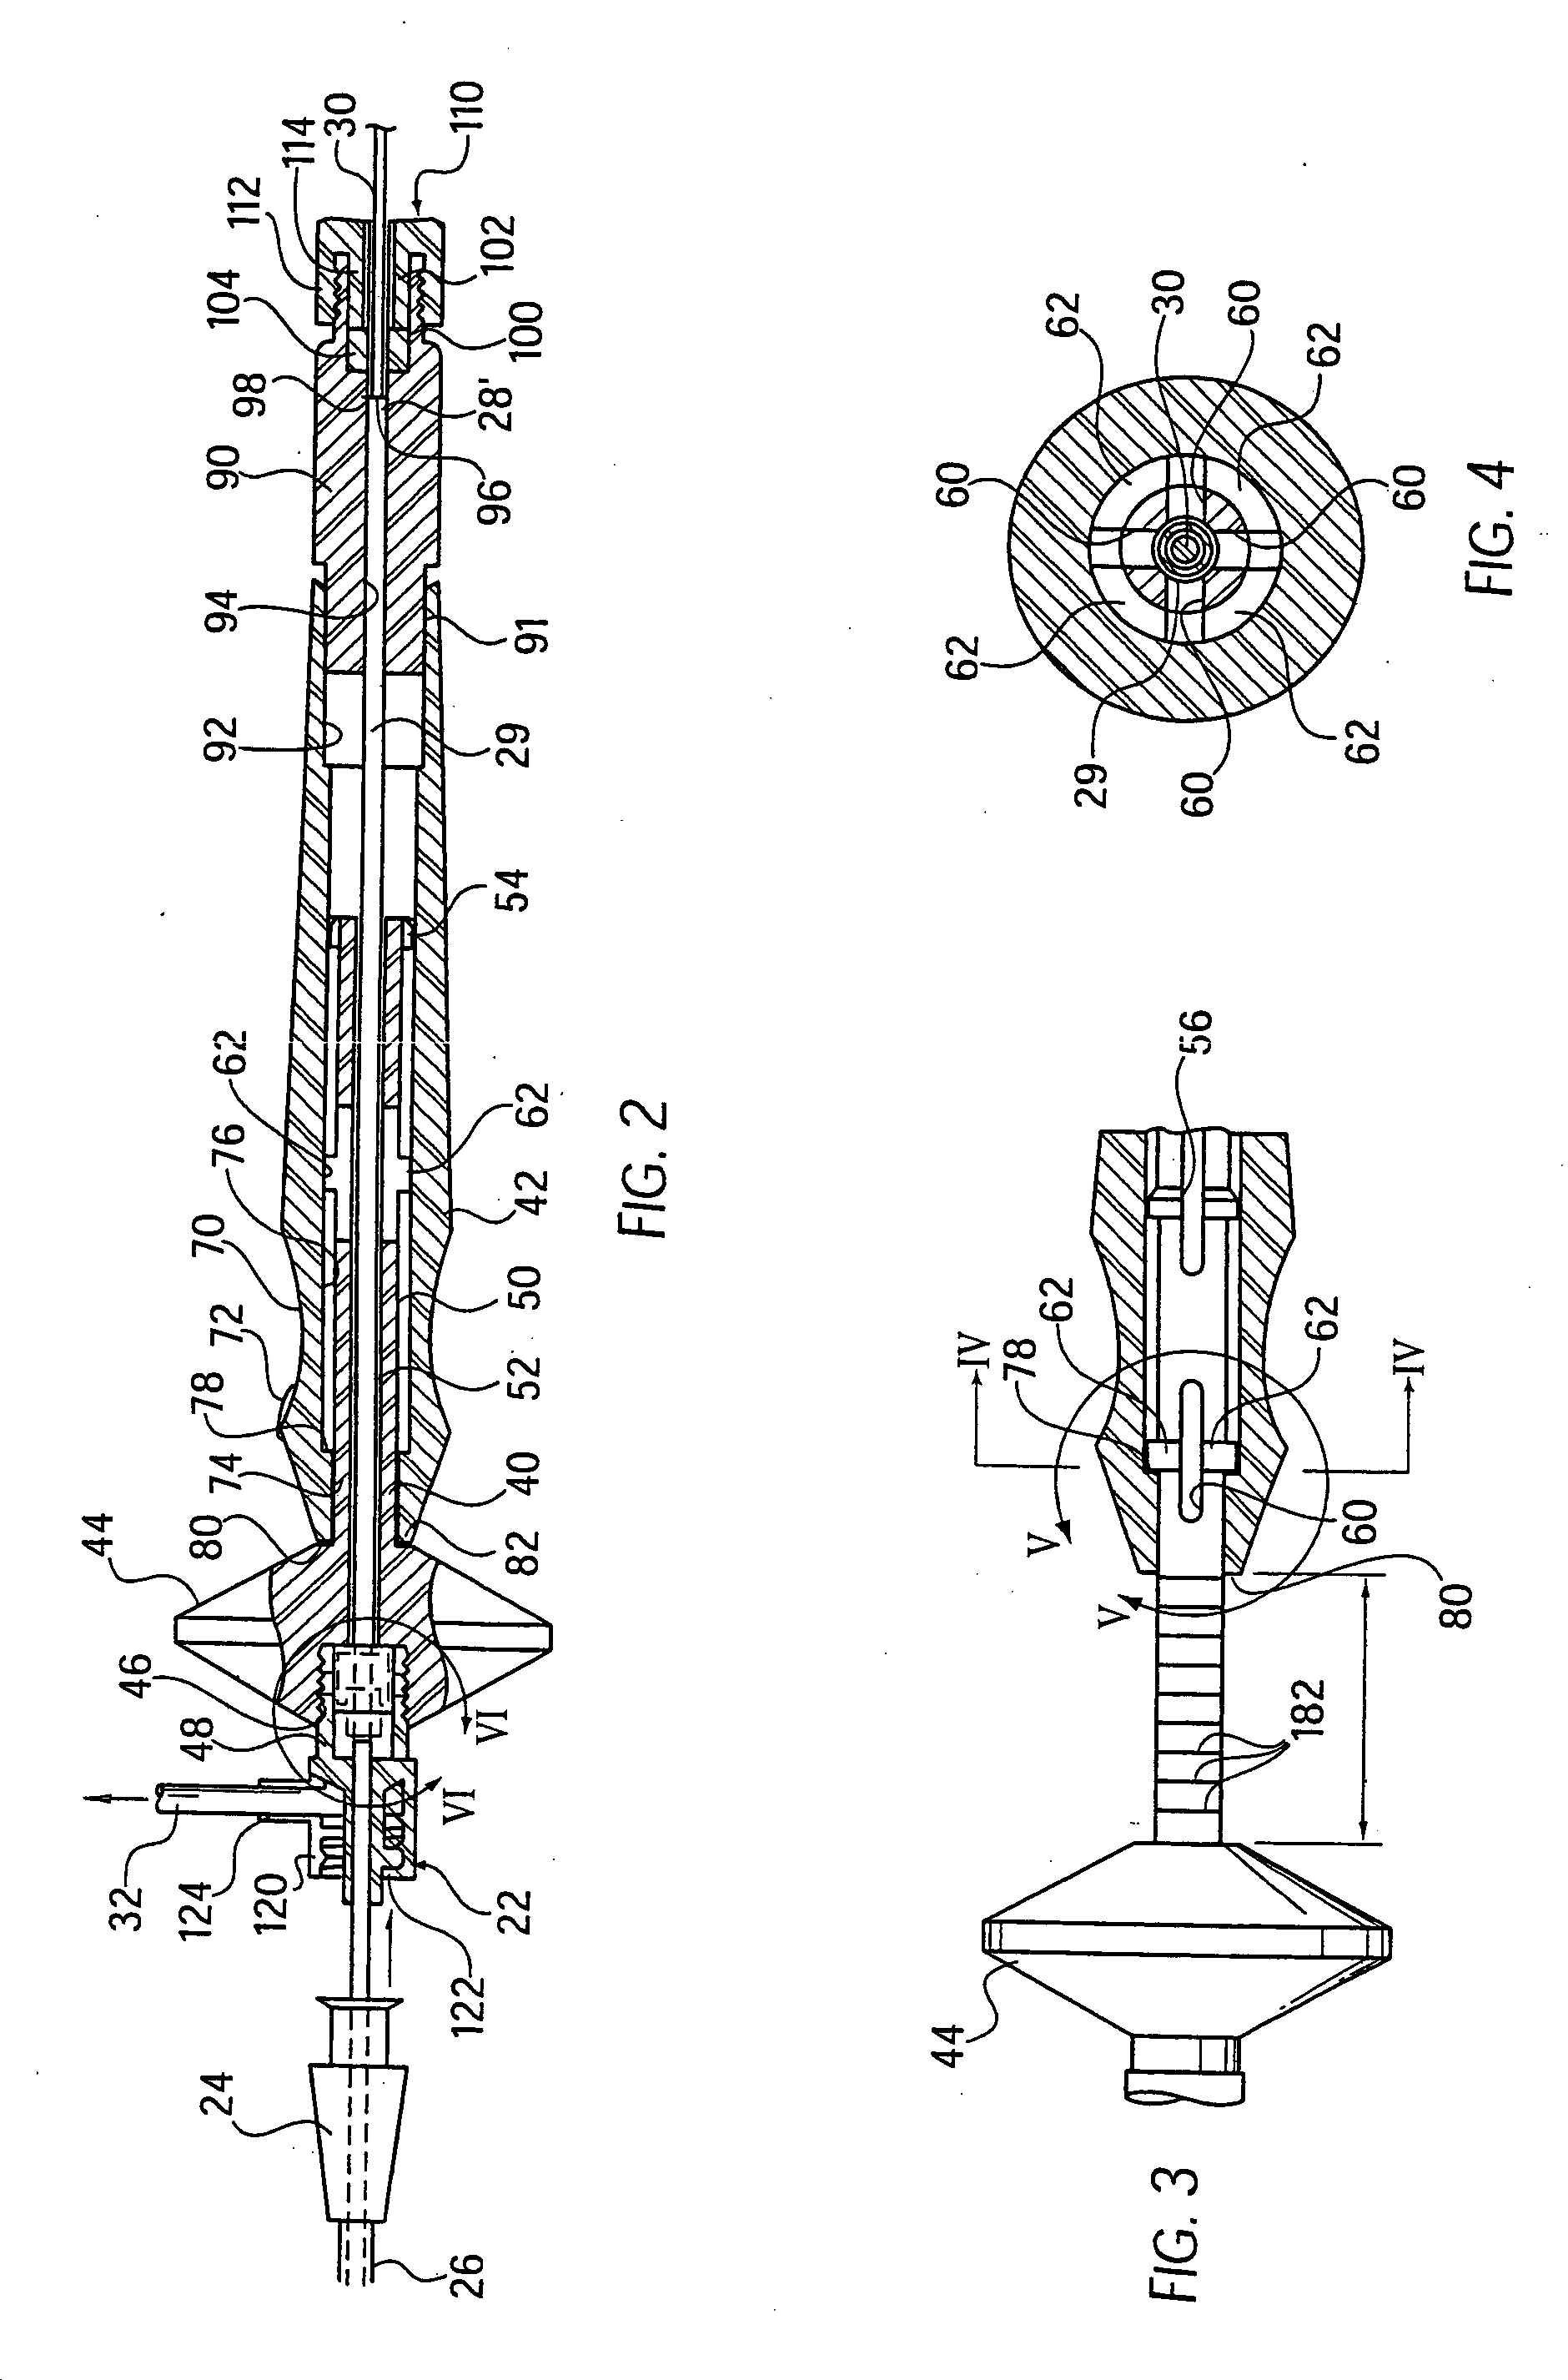 Apparatus and method for using a steerable catheter device